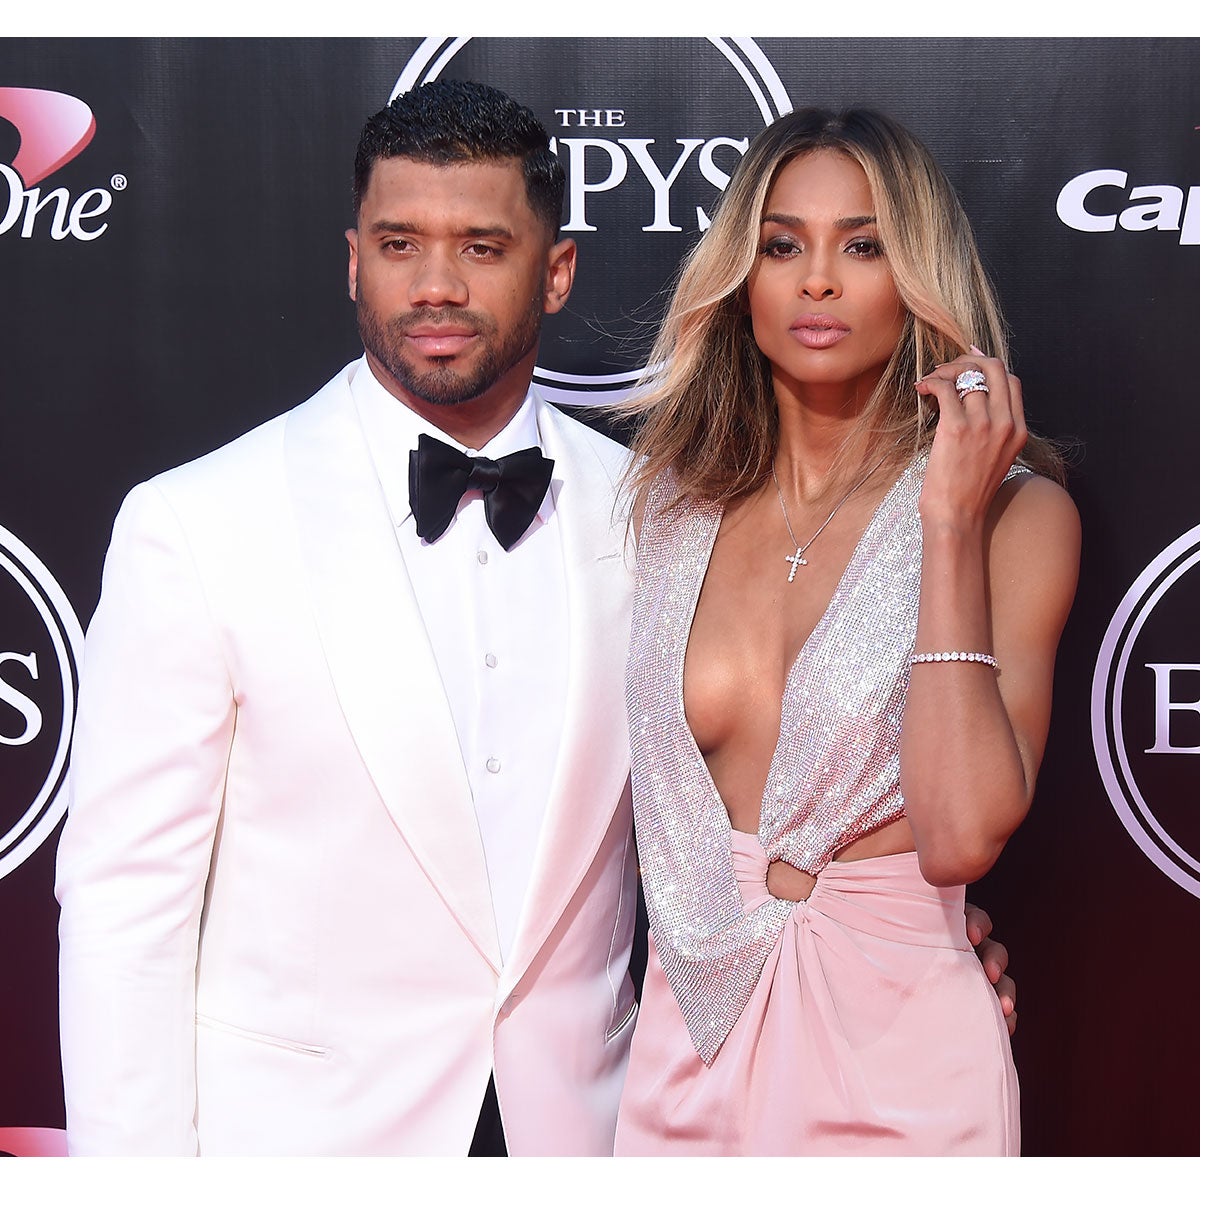 #RelationshipGoals: The Cutest Celebrity Couples at the 2016 ESPYS
